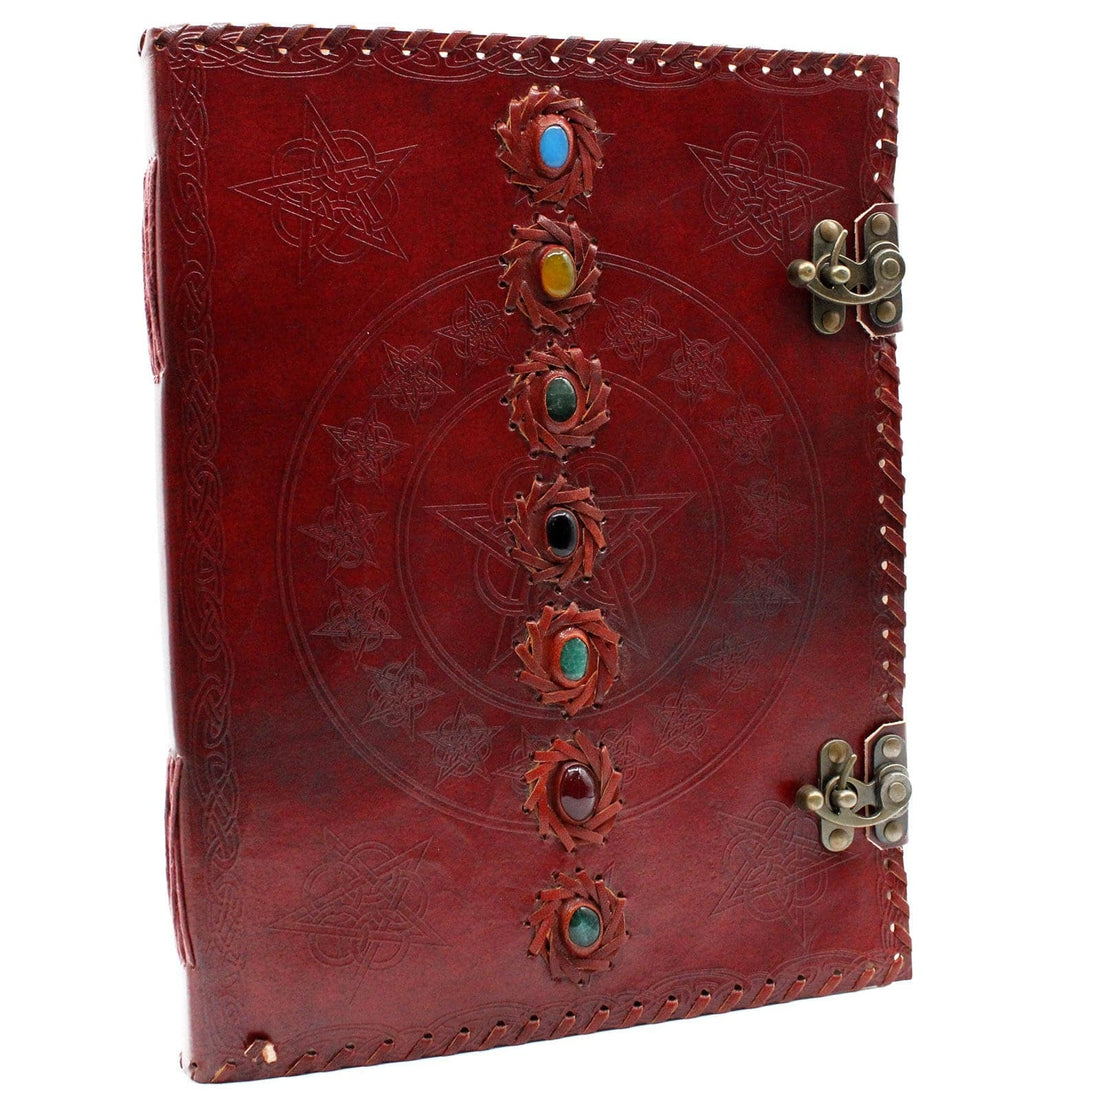 Huge 7 Chakra Leather Book - 10x13 (200 pages) - best price from Maltashopper.com LBN-20